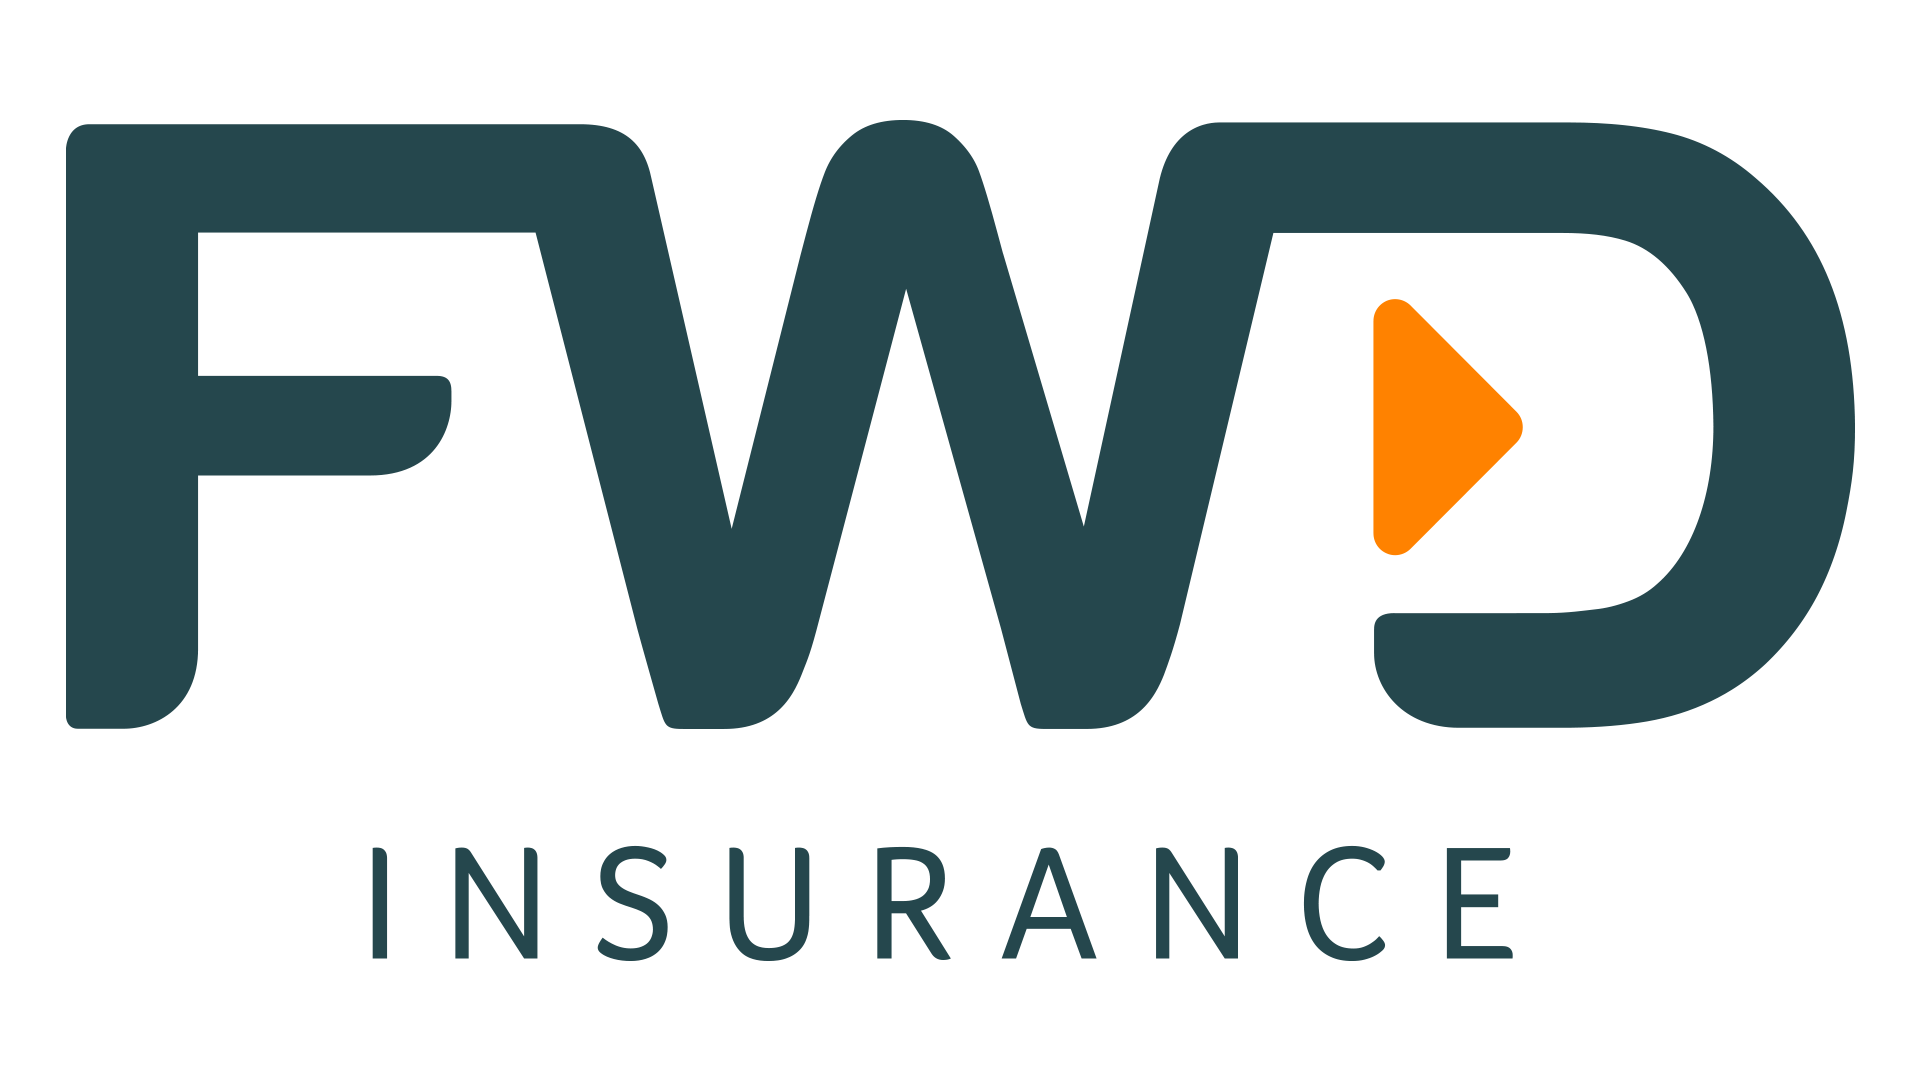 https://prima.co.th/wp-content/uploads/2022/03/FWD-Life-Insurance-Logo.png